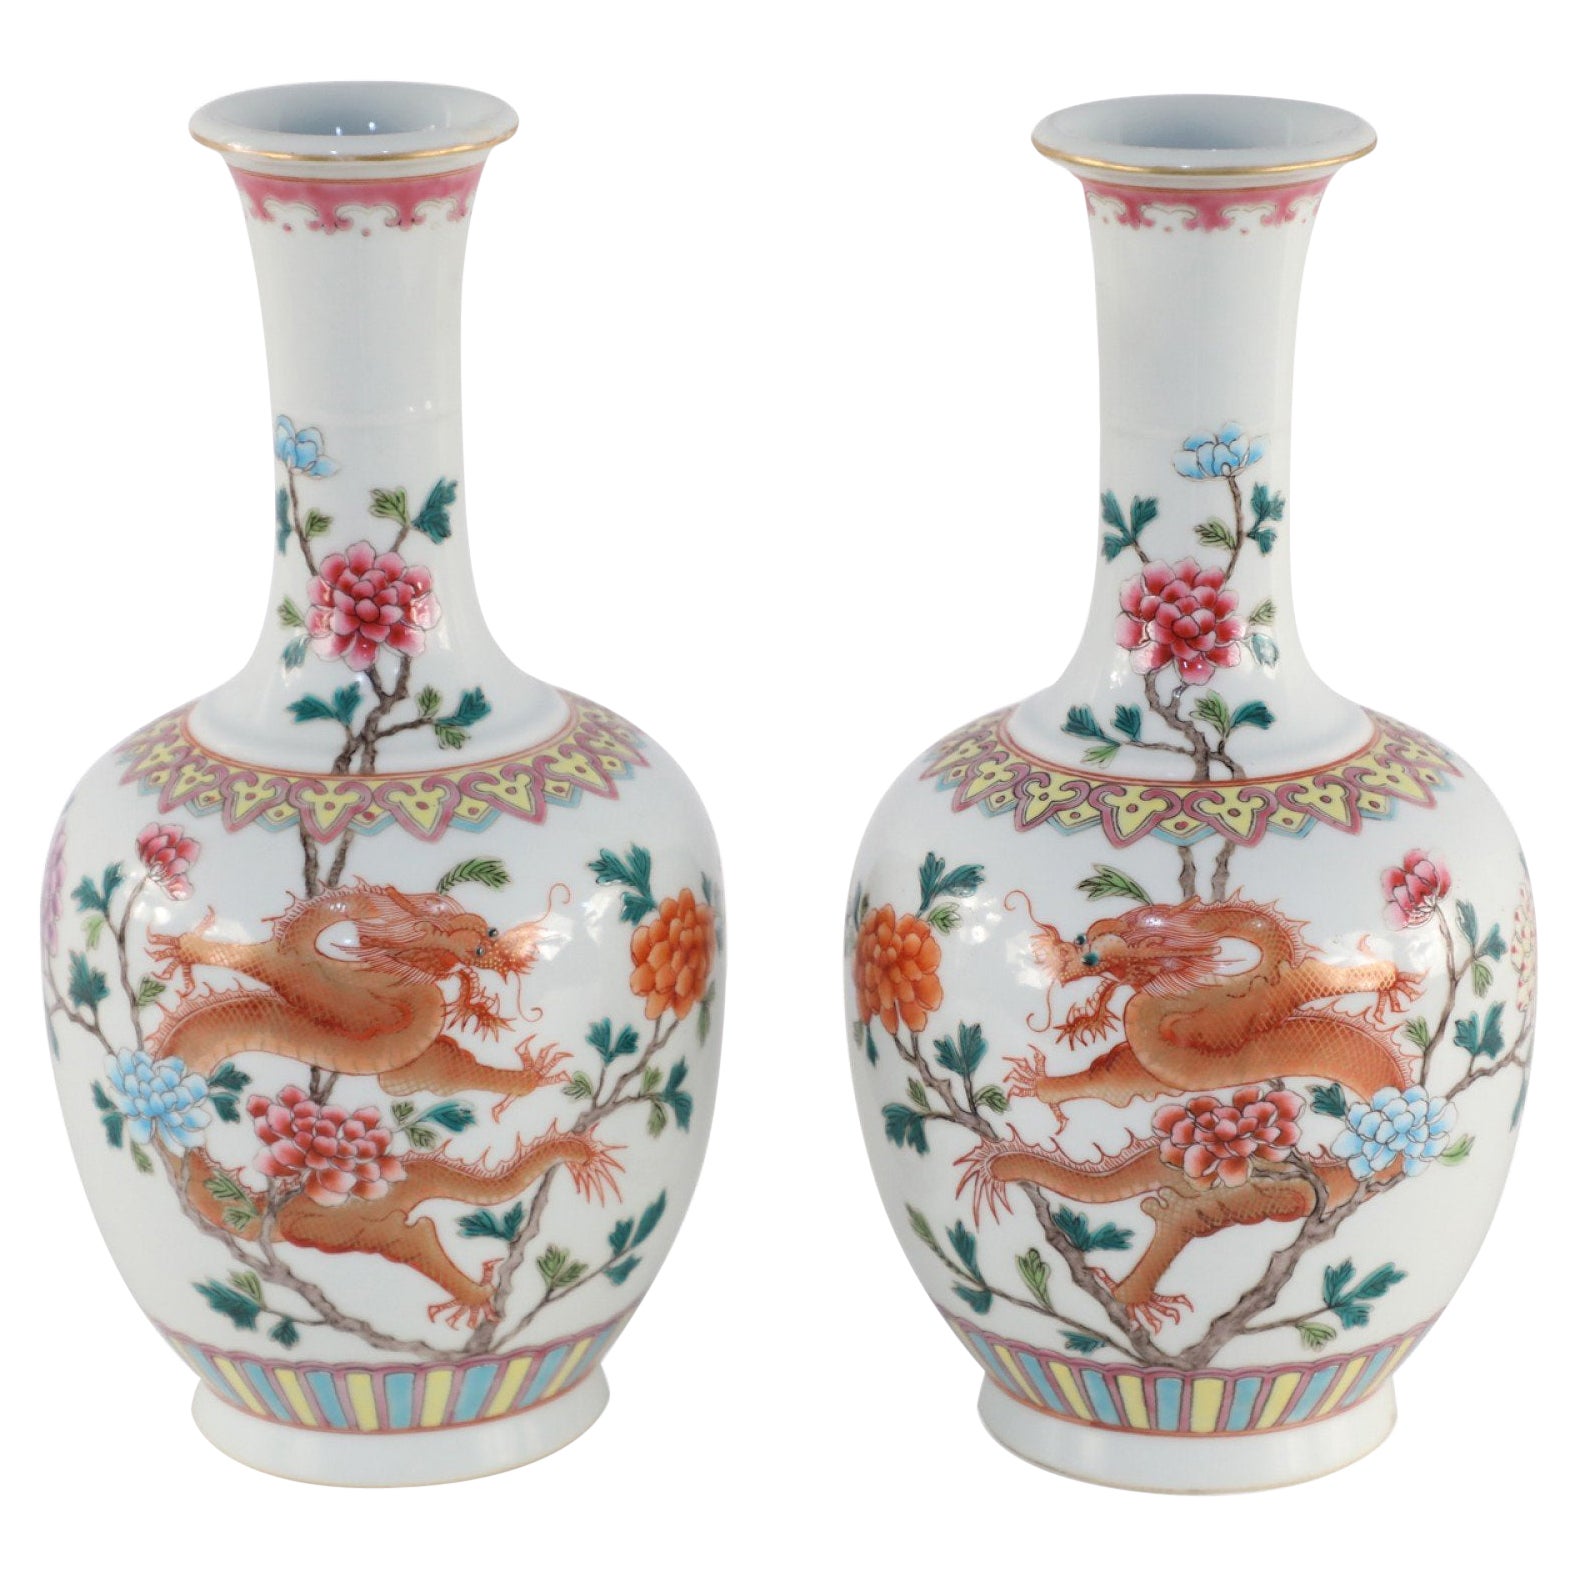 Pair of Chinese Qing Dynasty Orange Dragon and Floral Motif Porcelain Vases